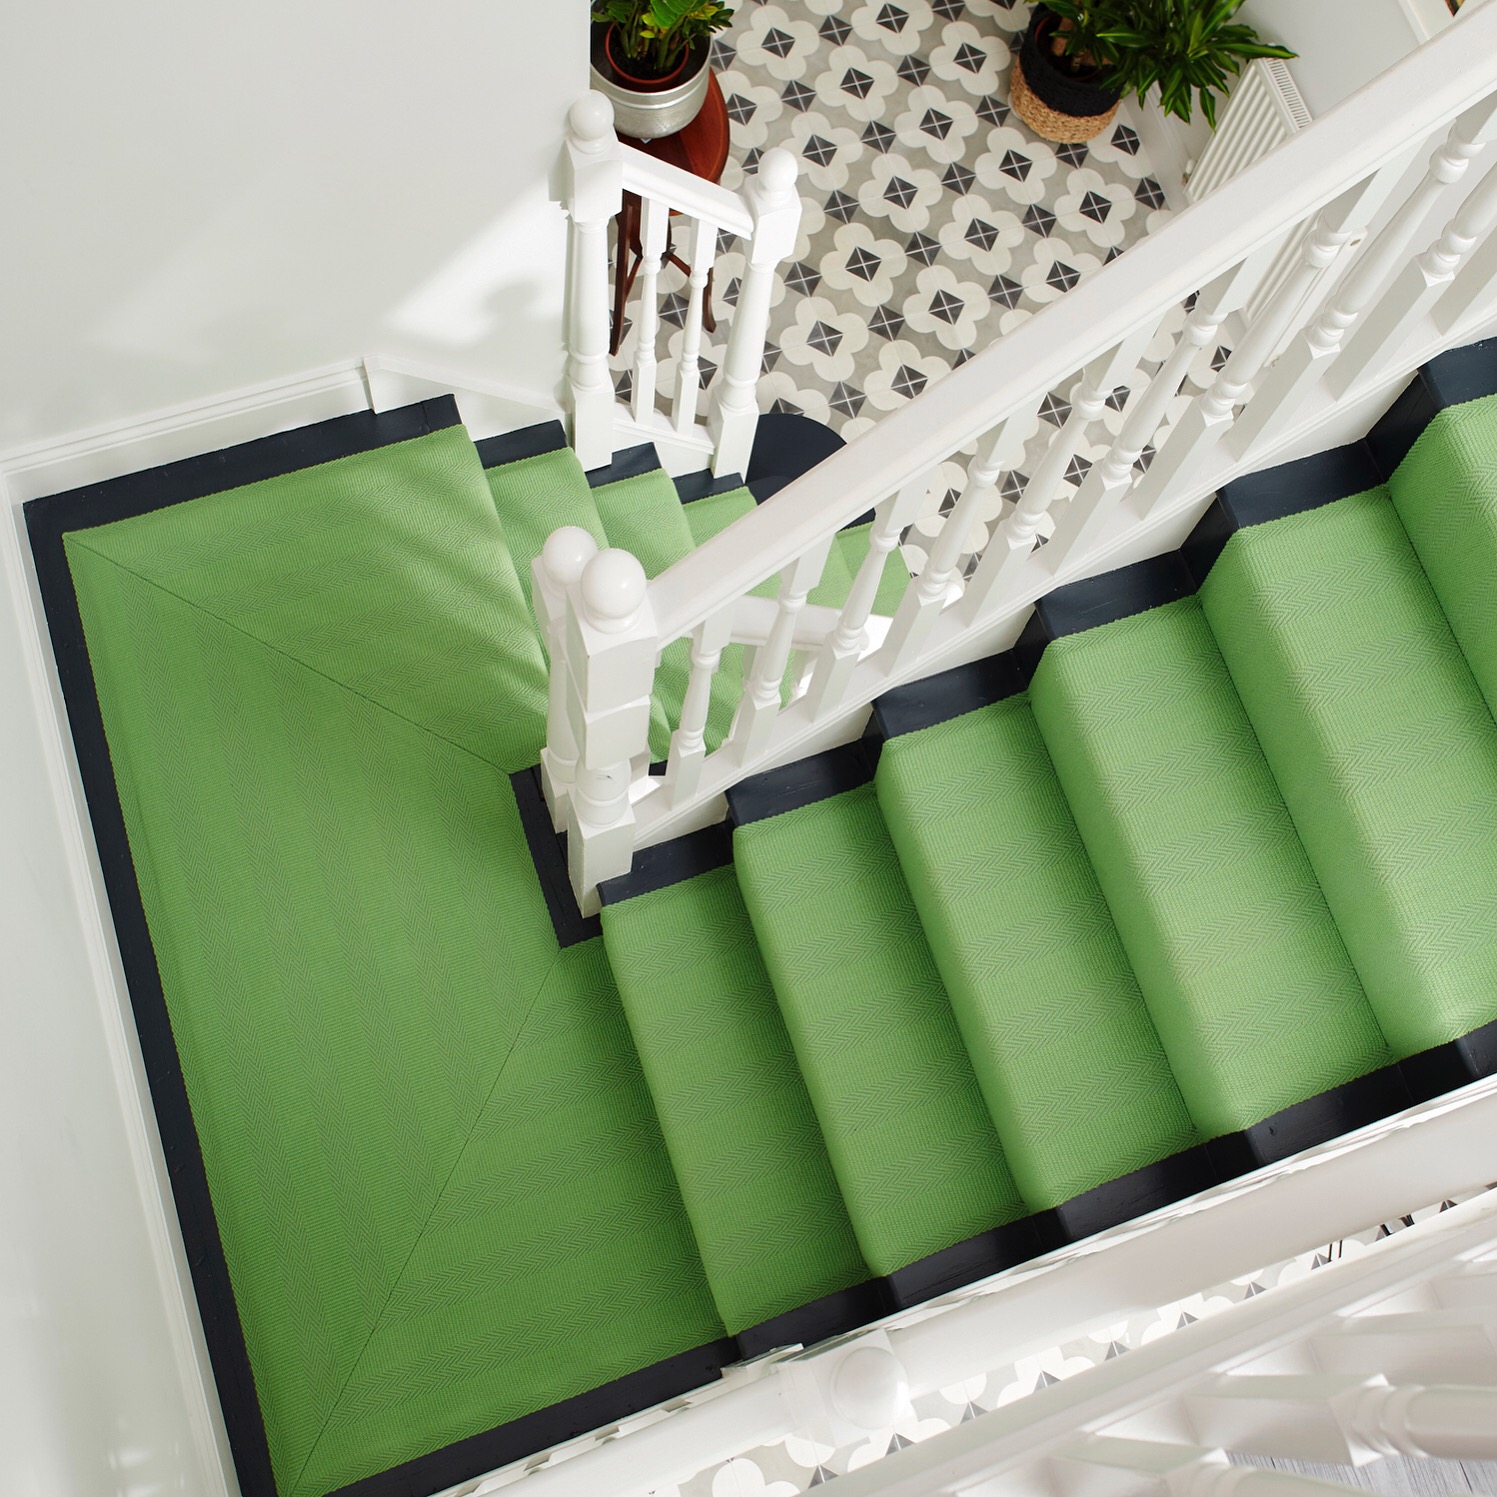 Life's too short not to have an amazing green stair carpet like Erica's